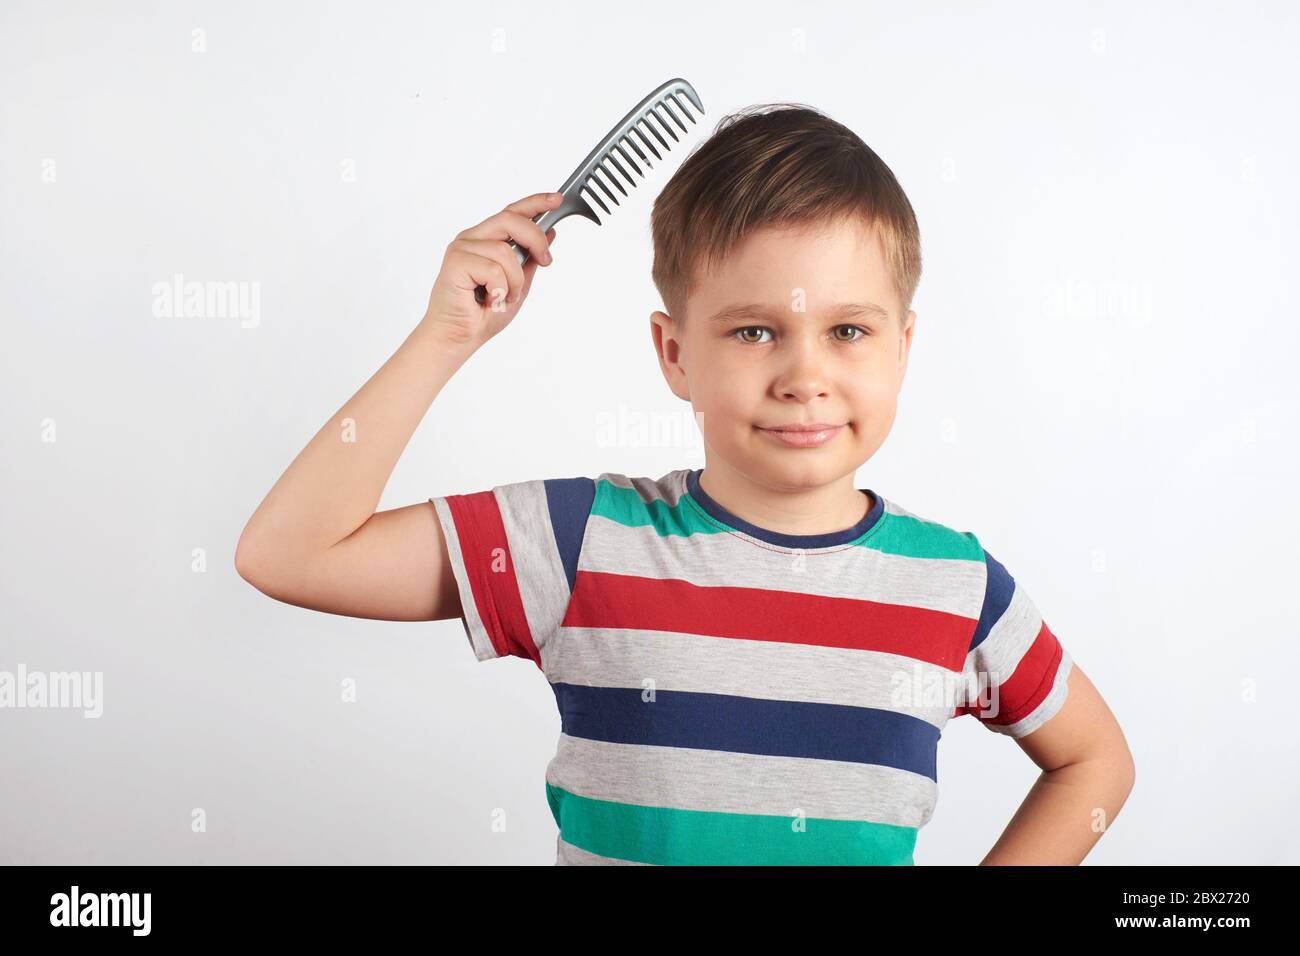 Brushing Hair 101: How To Comb Your Hair During Dandruff | Head & Shoulders  IN